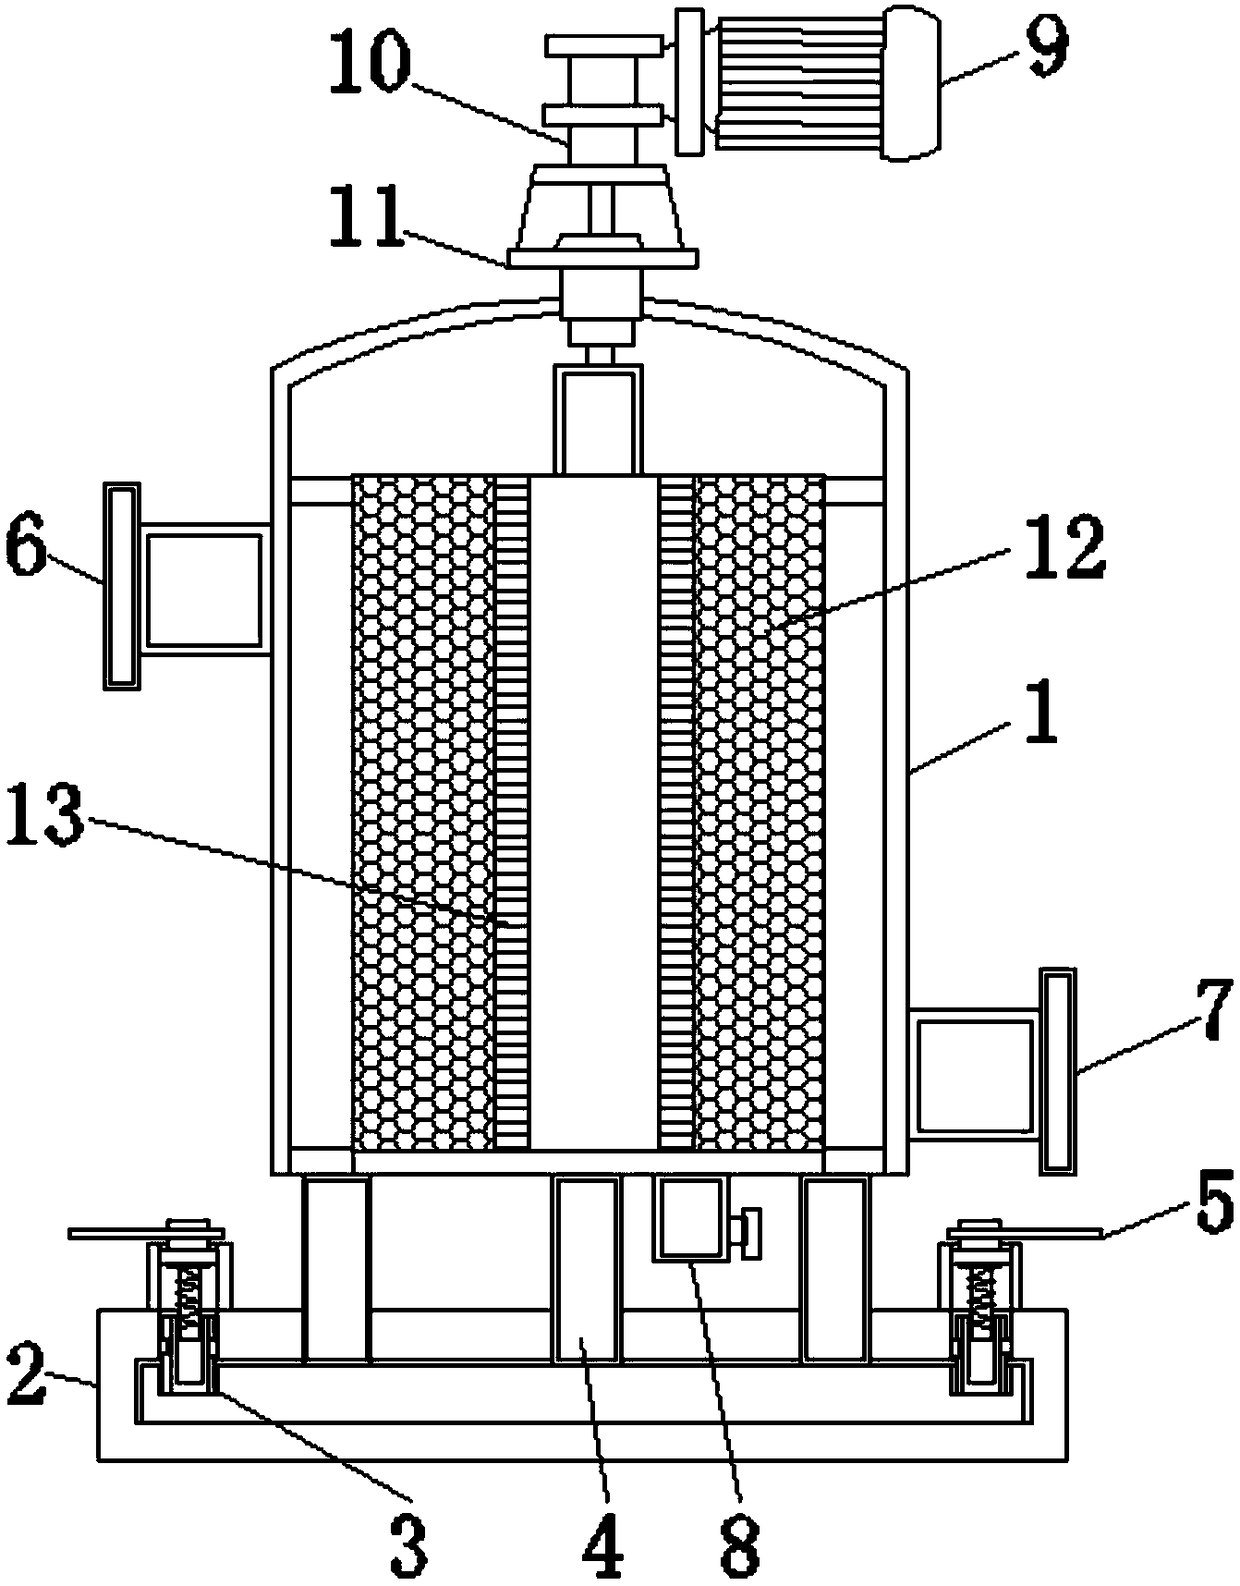 Water treatment self-cleaned filter for effectively reducing blocking